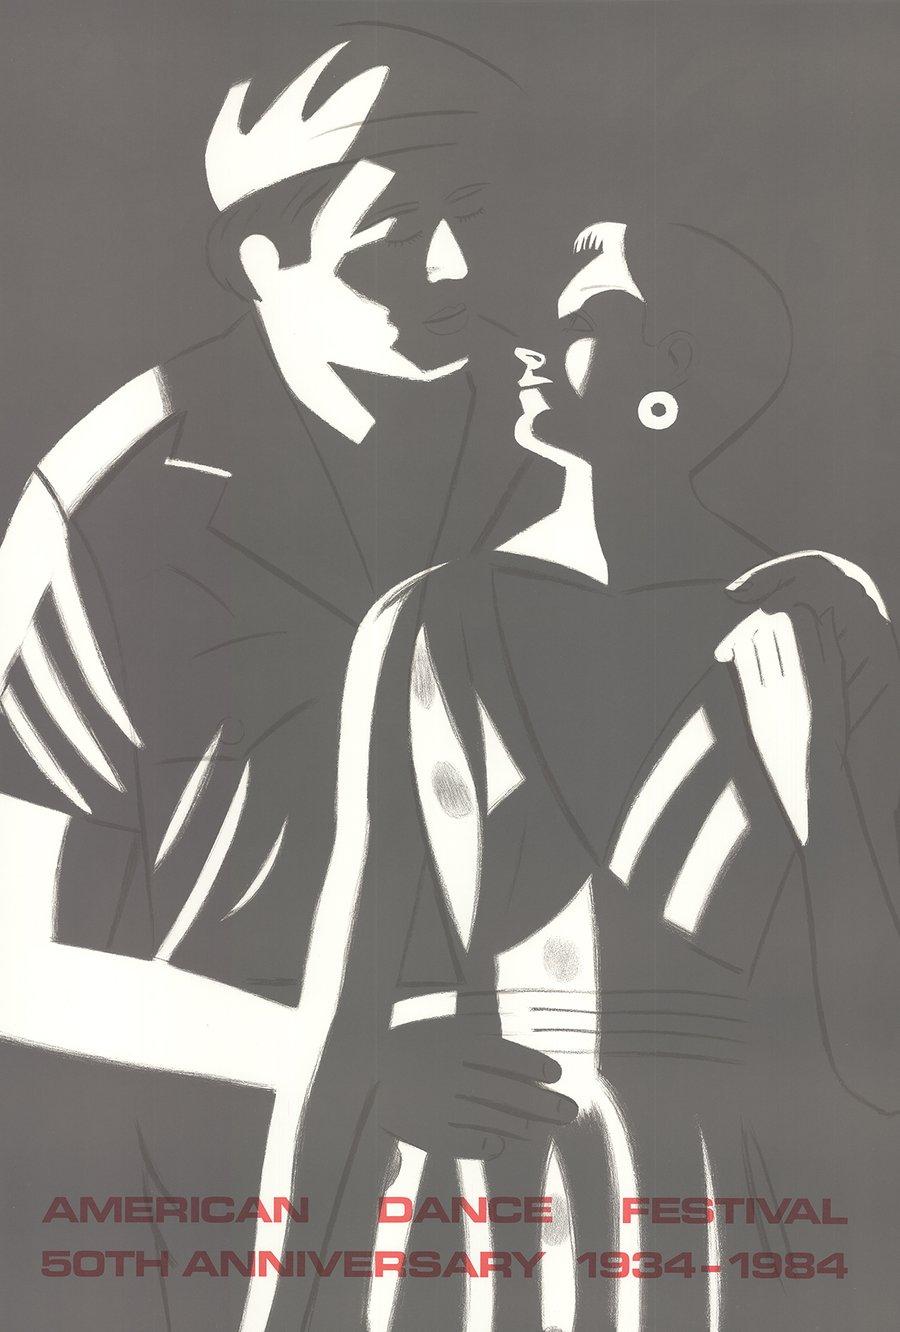 Sku: CB1508
Artist: Alex Katz
Title: Sunset-American Dance Festival
Year: 1984
Signed: No
Medium: Lithograph
Paper Size: 37.5 x 25.5 inches ( 95.25 x 64.77 cm )
Image Size: 37.5 x 25.5 inches ( 95.25 x 64.77 cm )
Edition Size: Unknown
Framed: